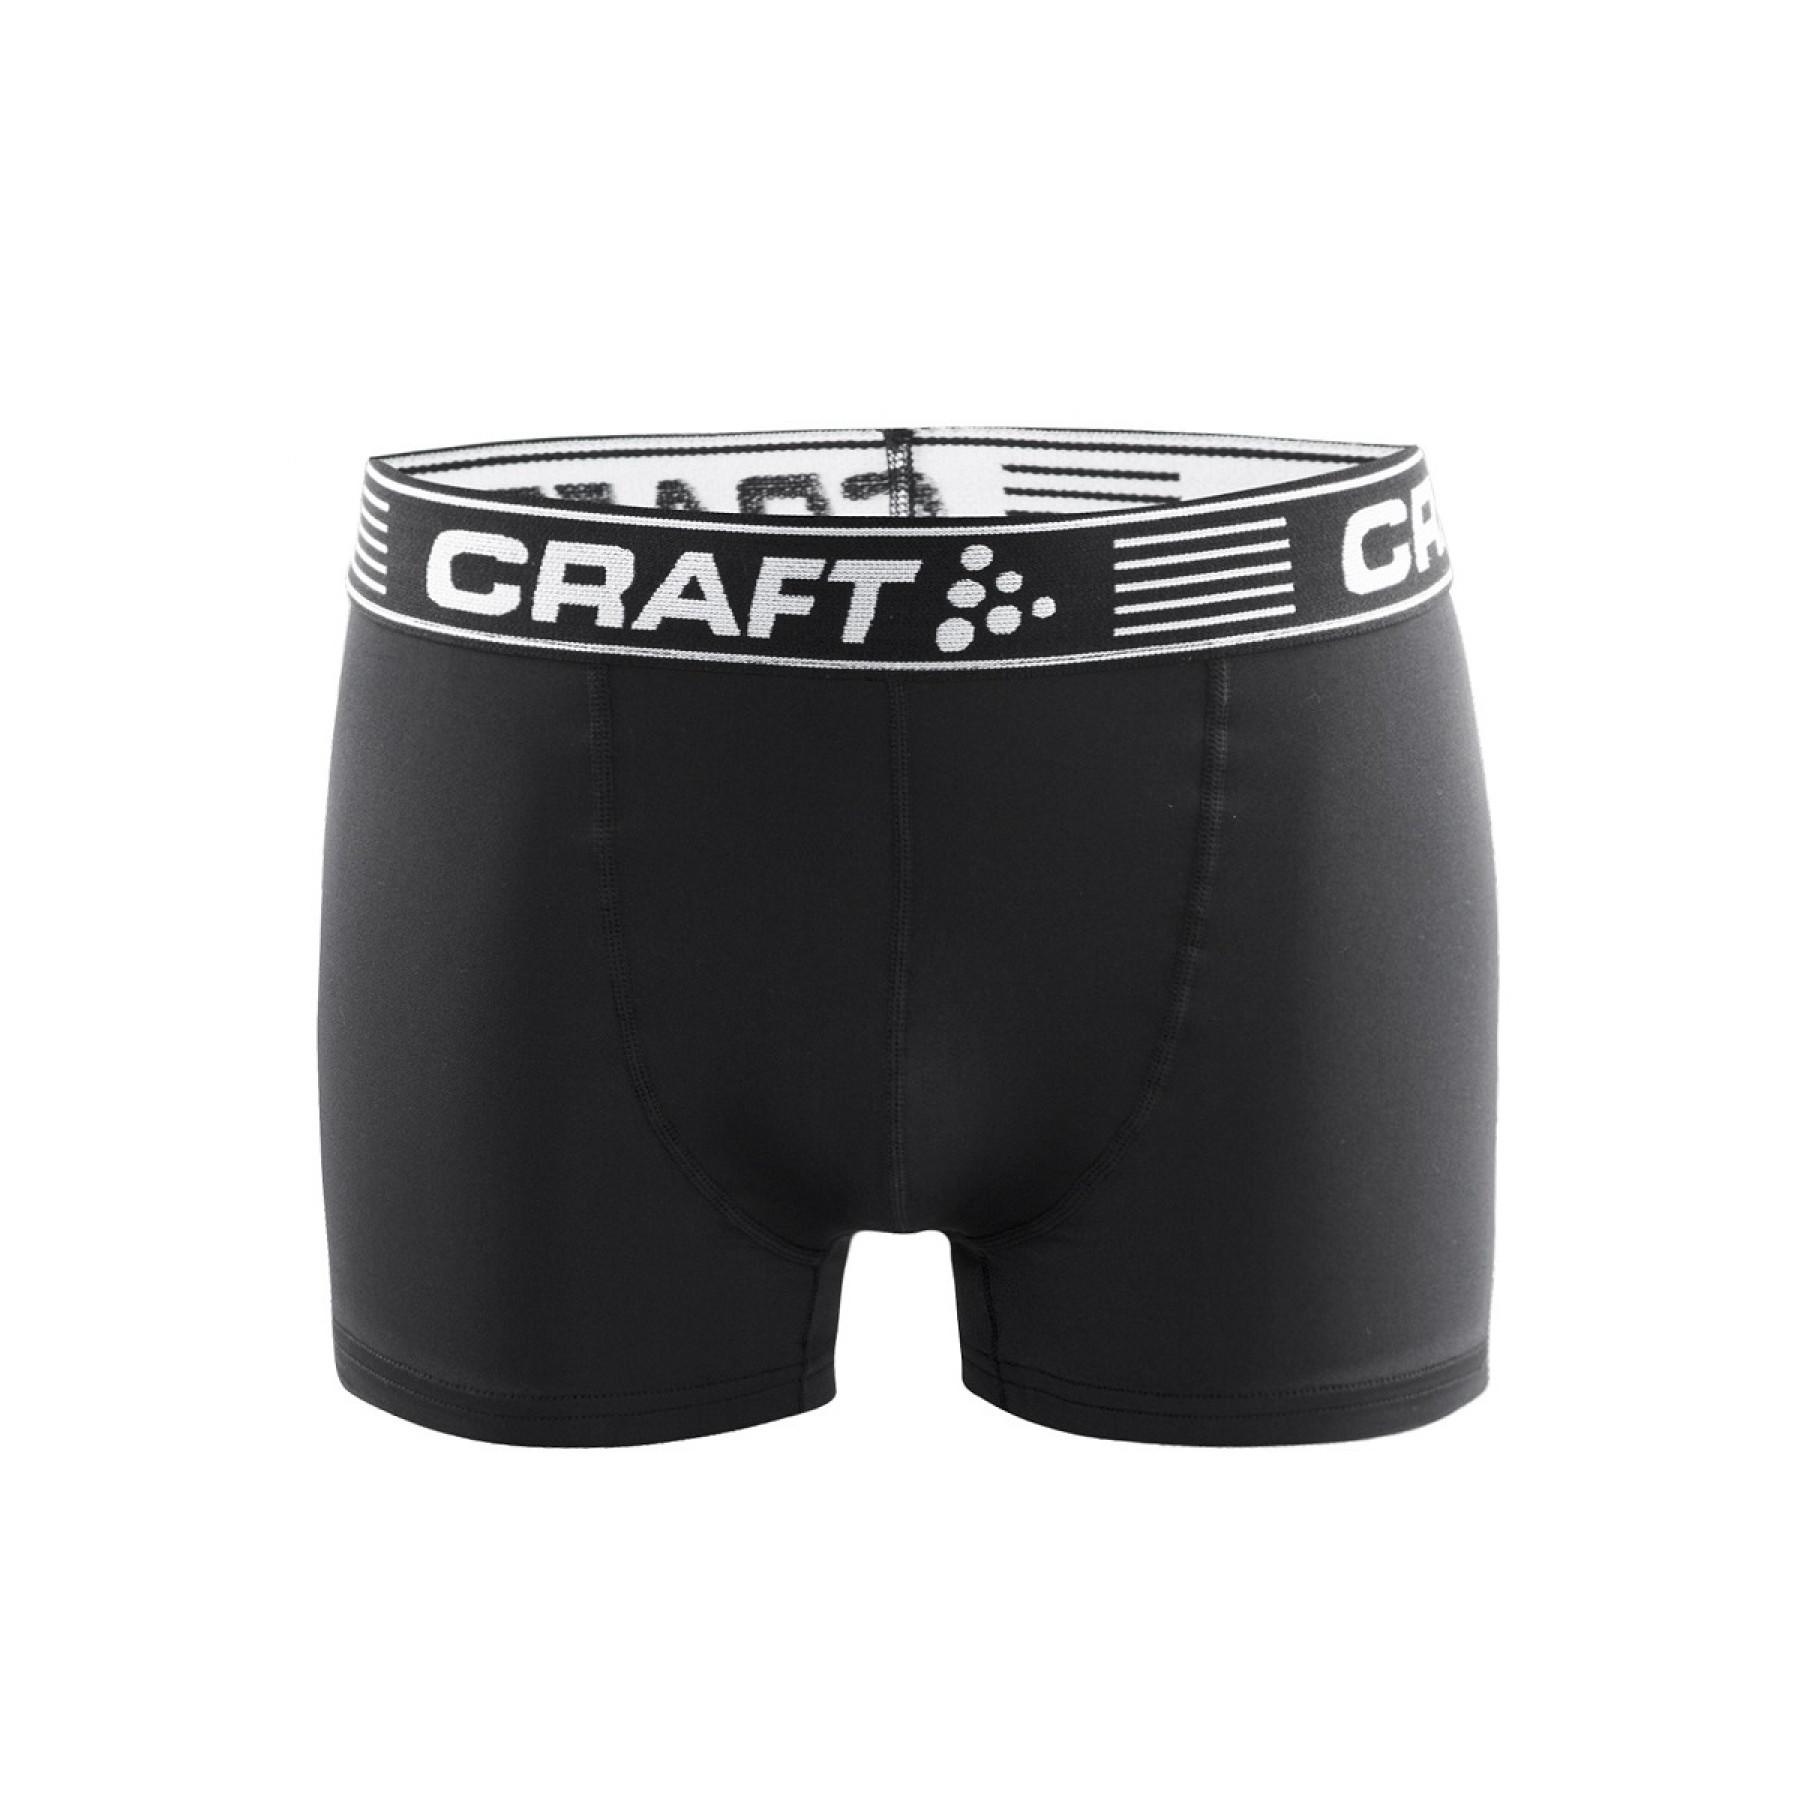 Boxer Craft greatness 3-inch